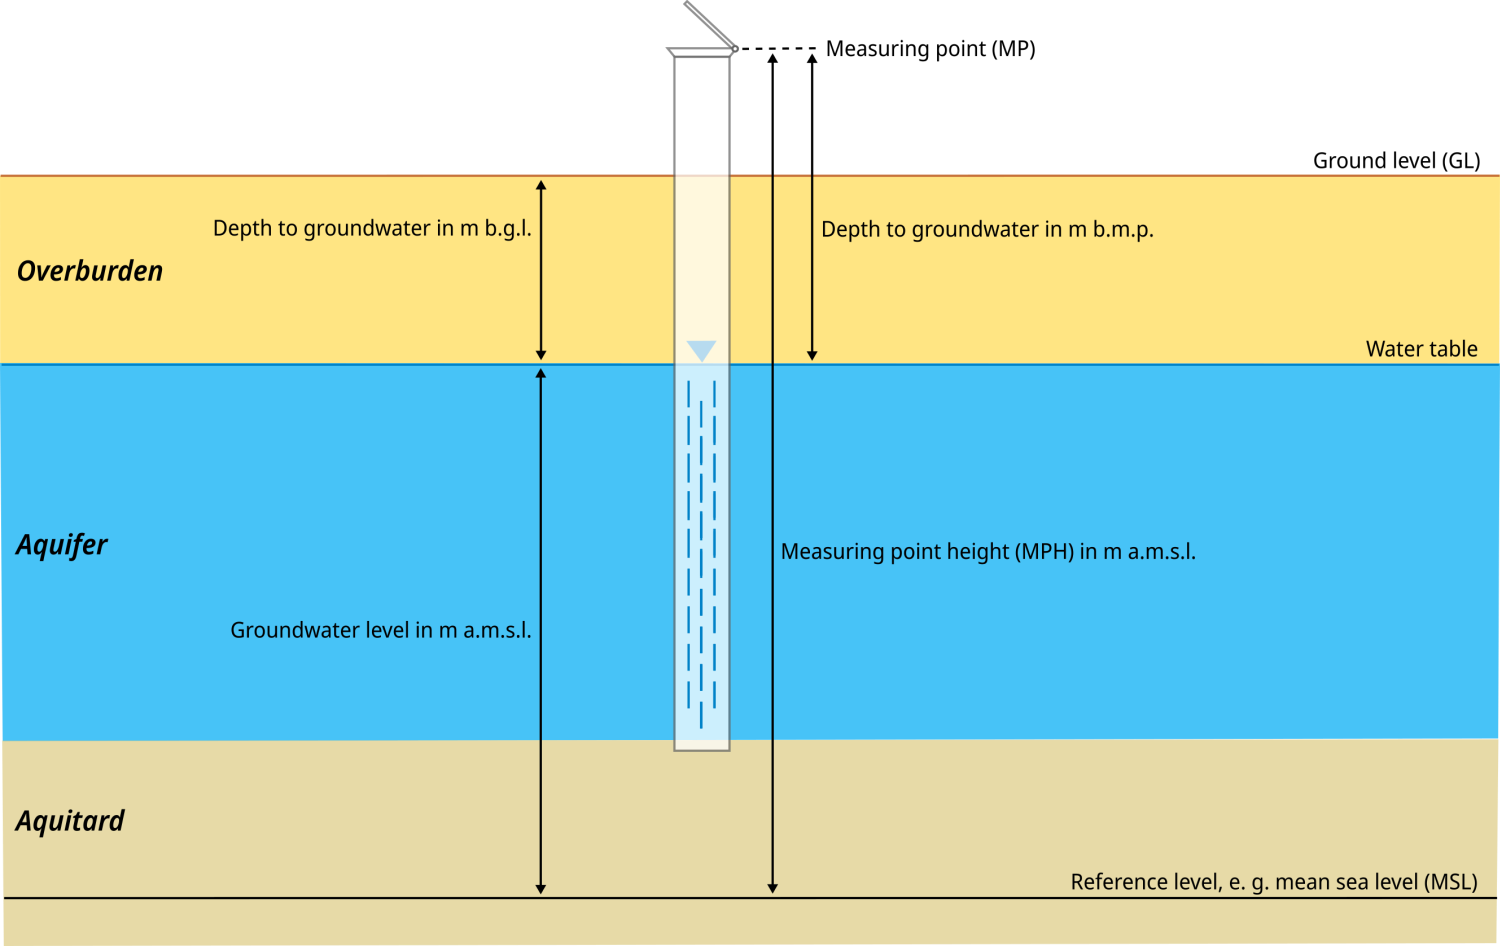 Schematic illustration of a groundwater monitoring site and common groundwater levels measured.